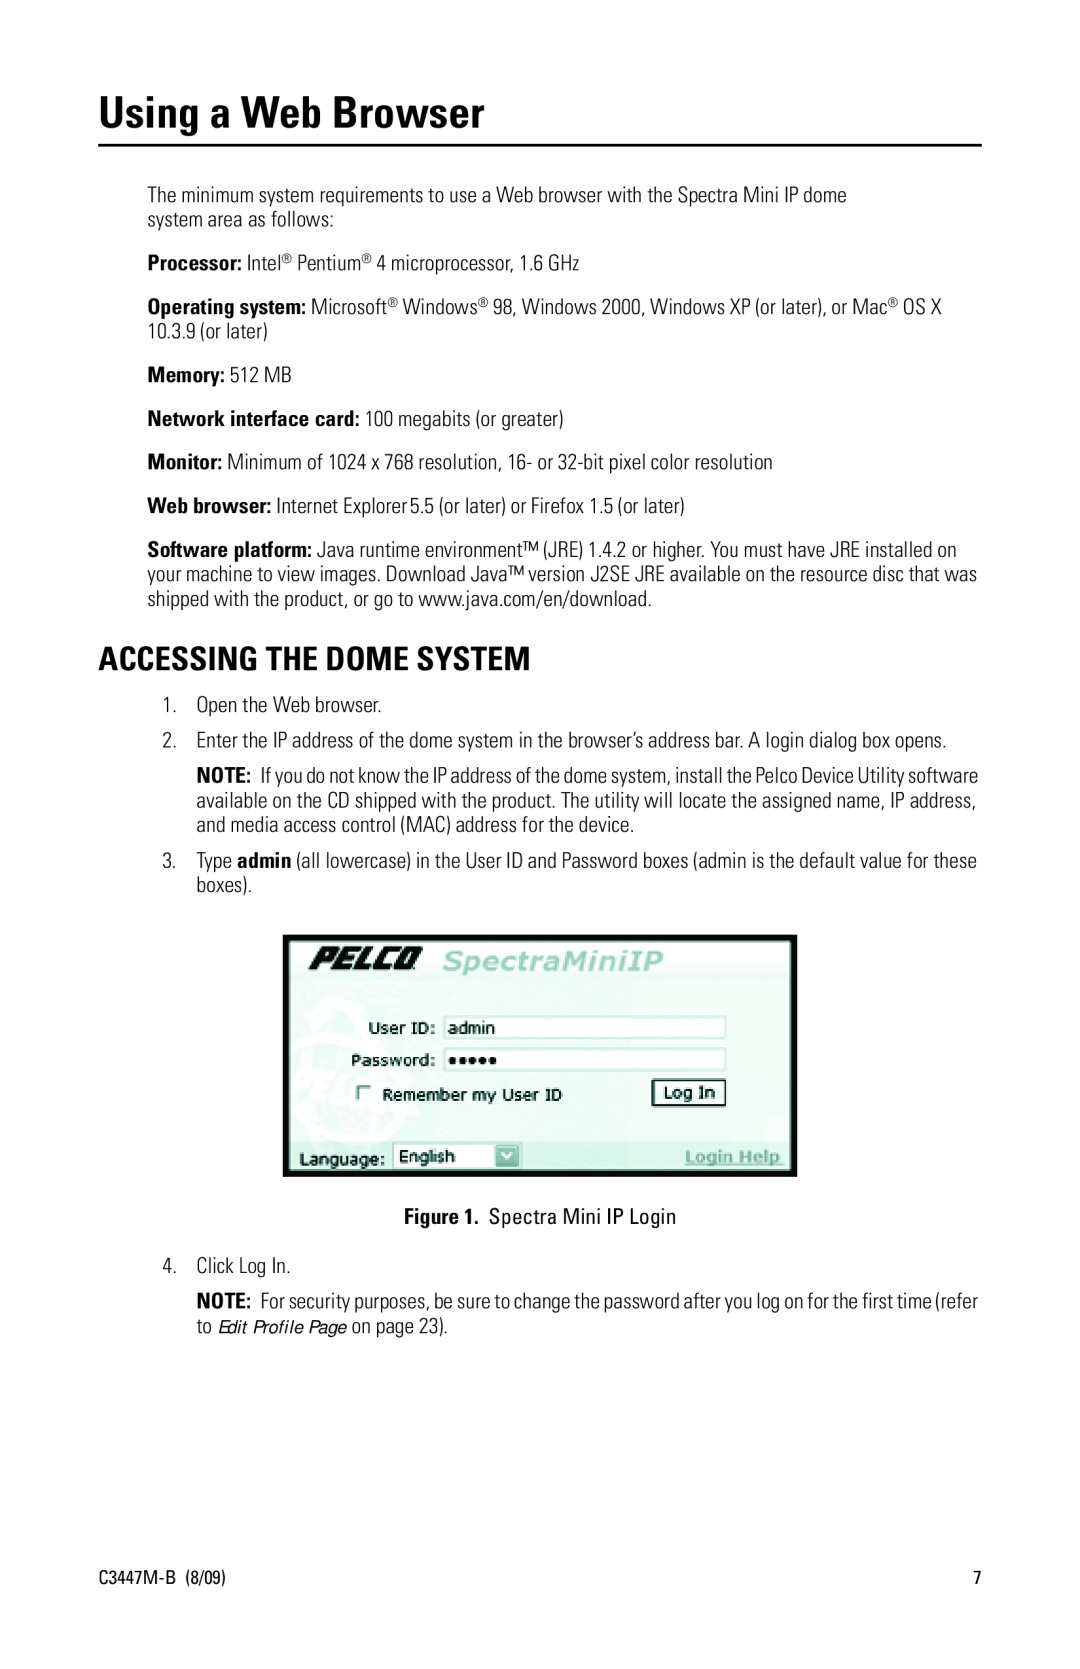 Pelco C3447M-B (8/09) manual Using a Web Browser, Accessing The Dome System, Memory 512 MB 